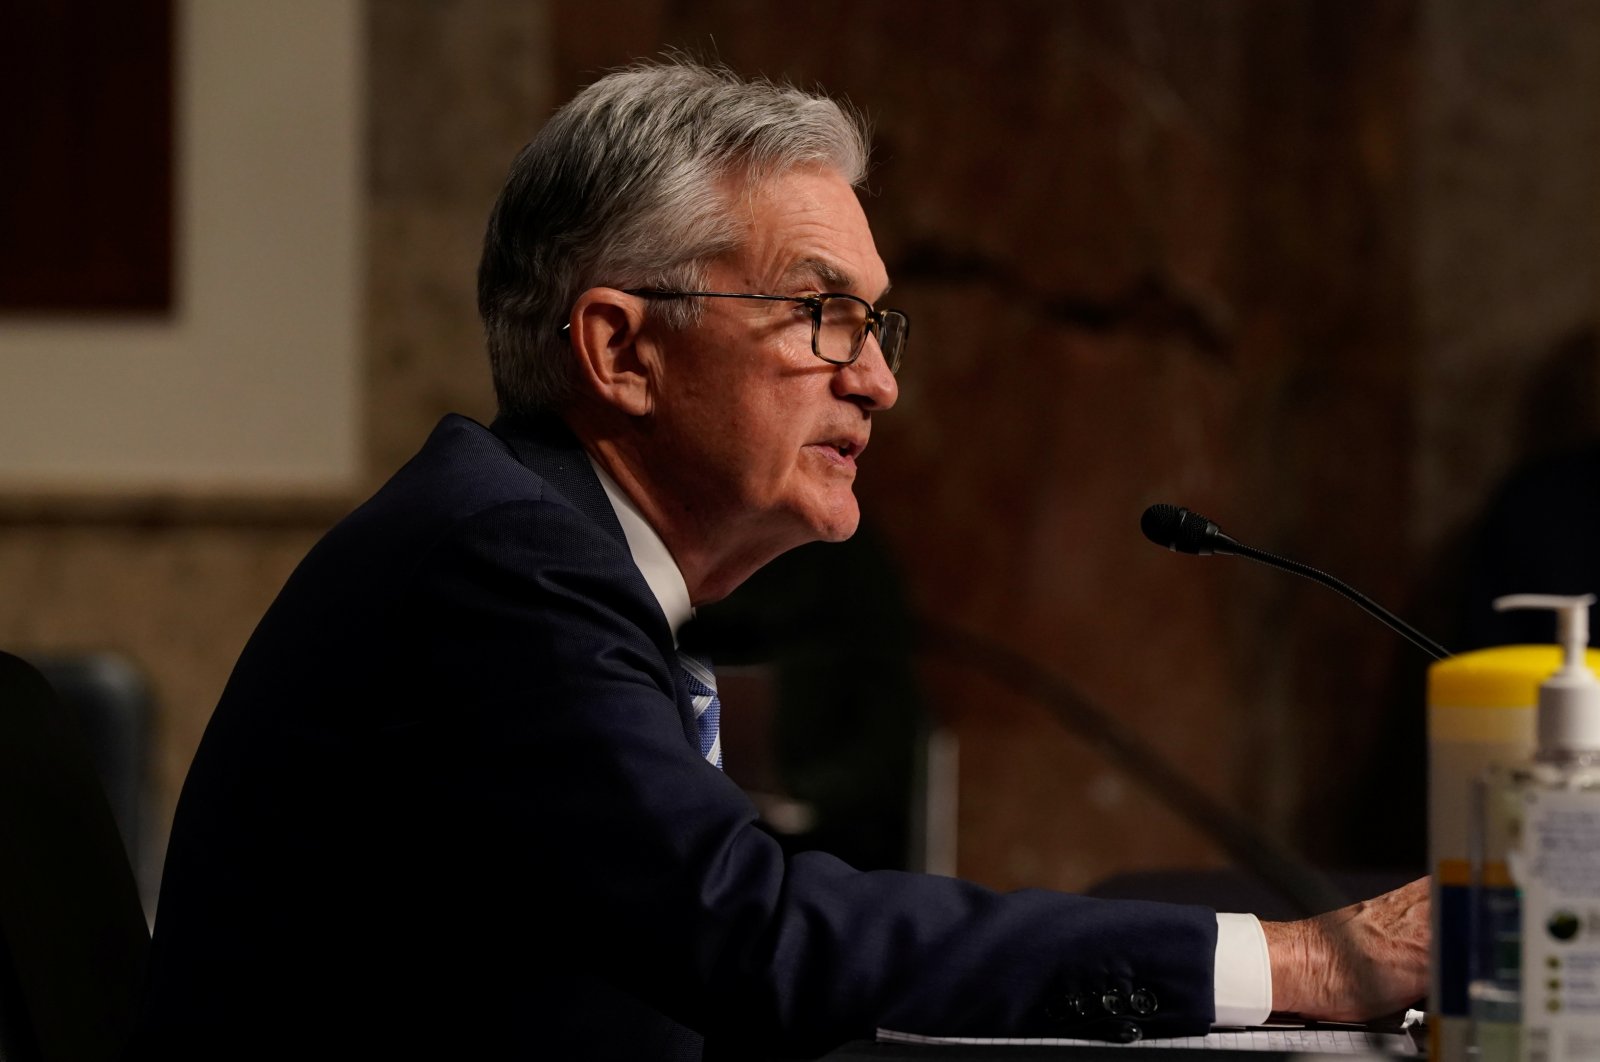 Federal Reserve Chair Jerome Powell testifies before a Senate Banking Committee hybrid hearing on oversight of the Treasury Department and the Federal Reserve on Capitol Hill in Washington, U.S., Nov. 30, 2021. (Reuters Photo)